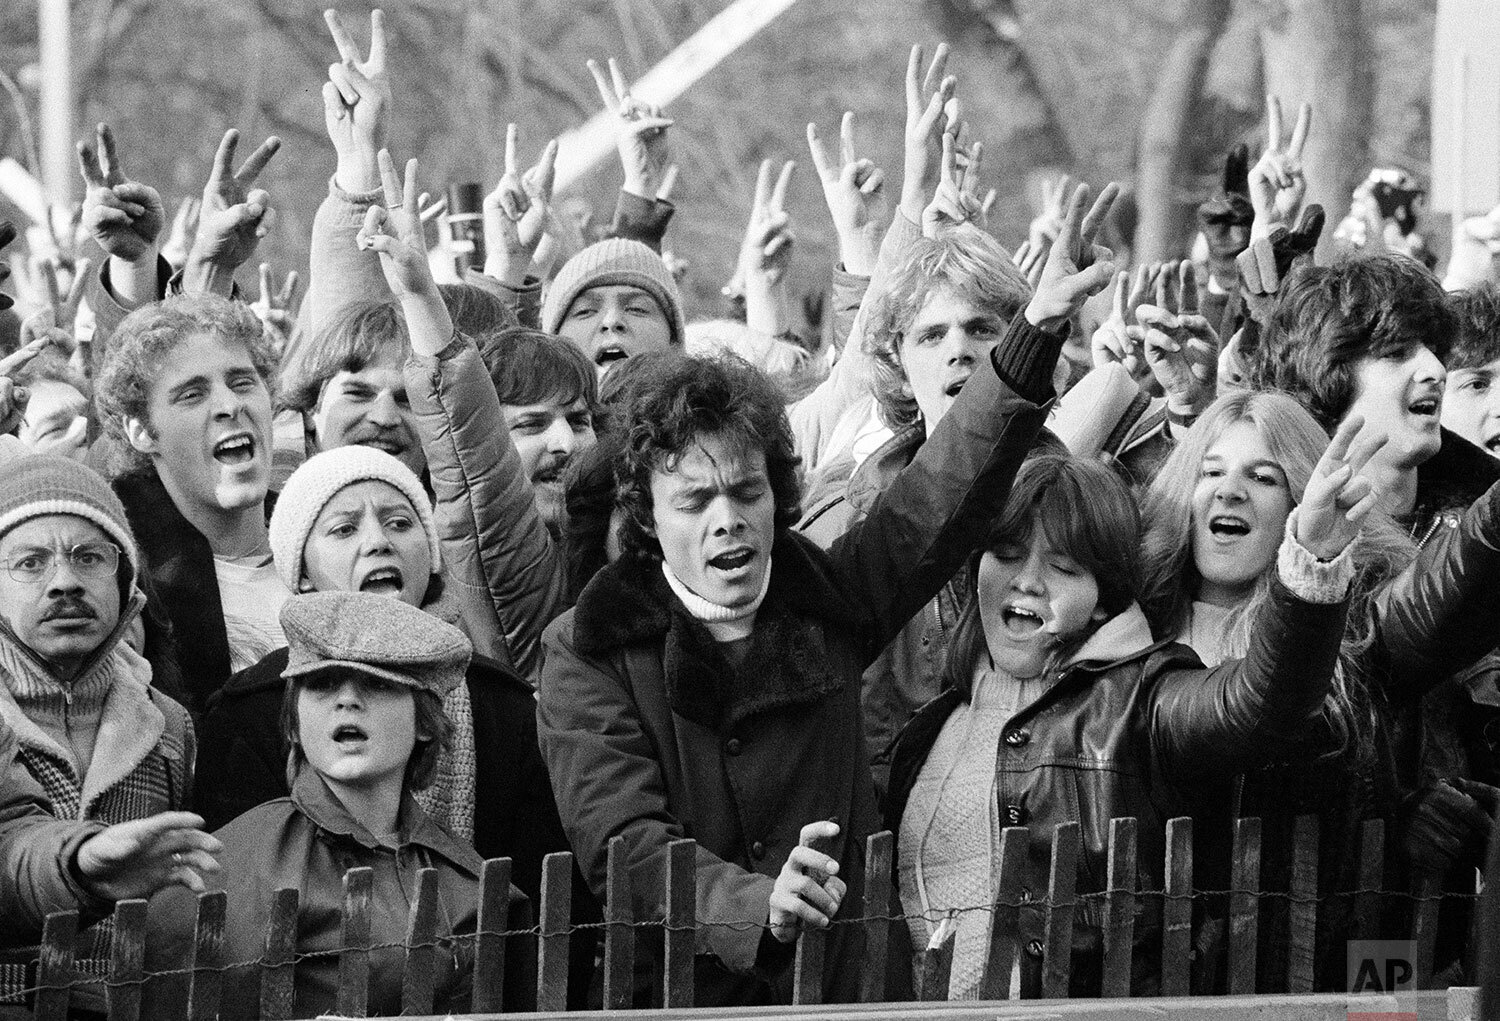  People participating in a tribute to the slain musician John Lennon wave the peace sign and sing "Give Peace A Chance" at New York's Central Park, Dec. 14, 1980. (AP Photo/Carlos Rene Perez) 